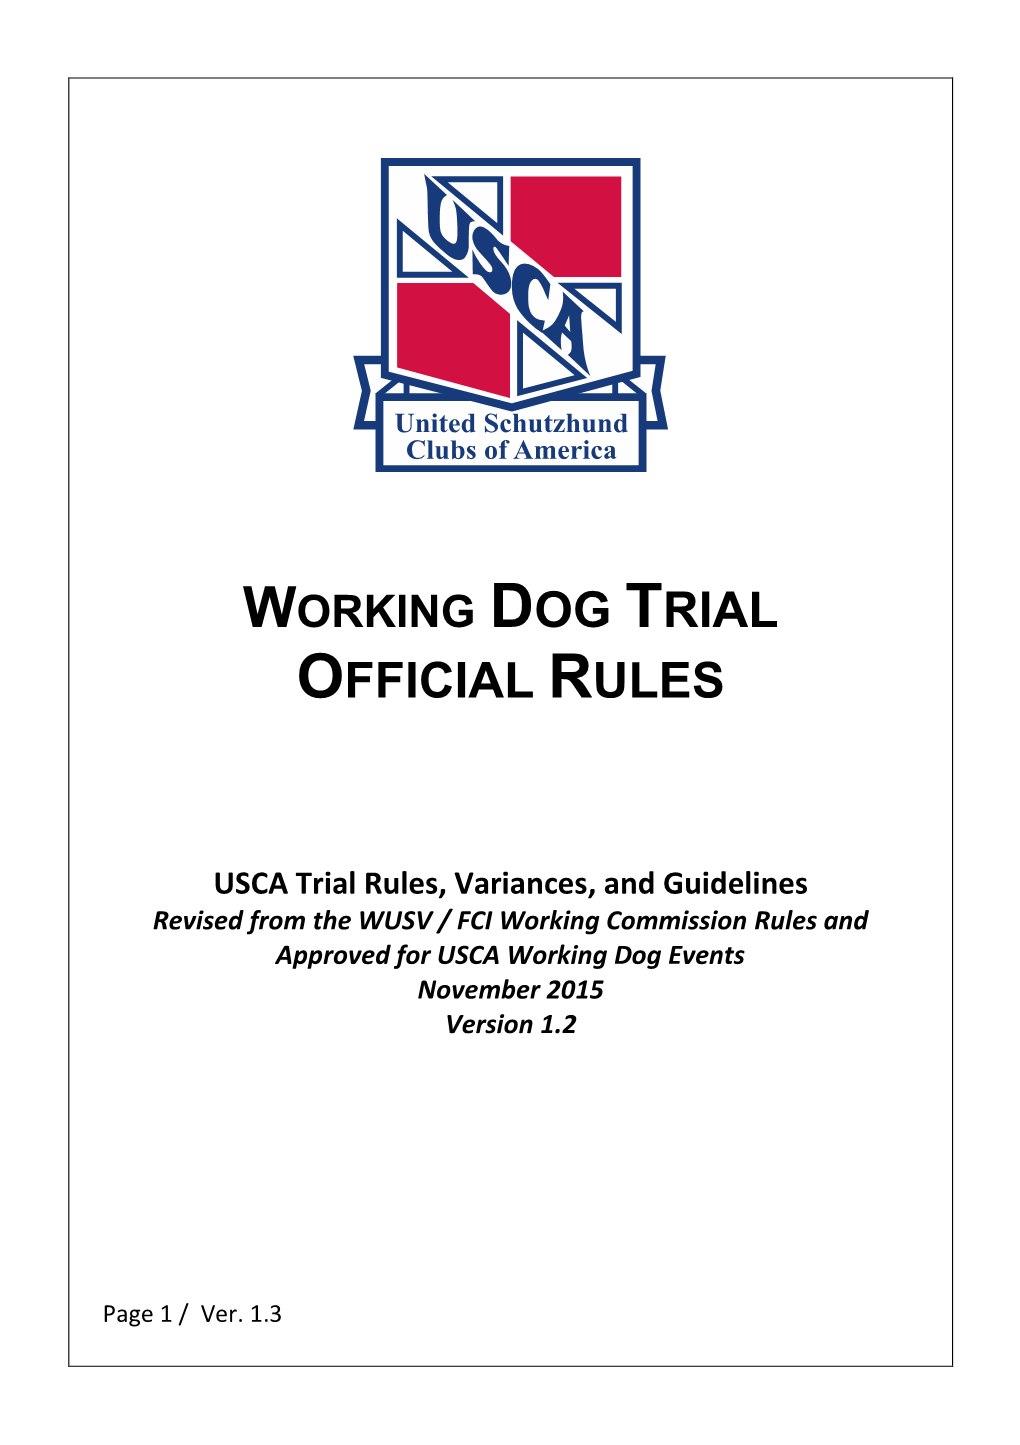 Working Dog Trial Official Rules